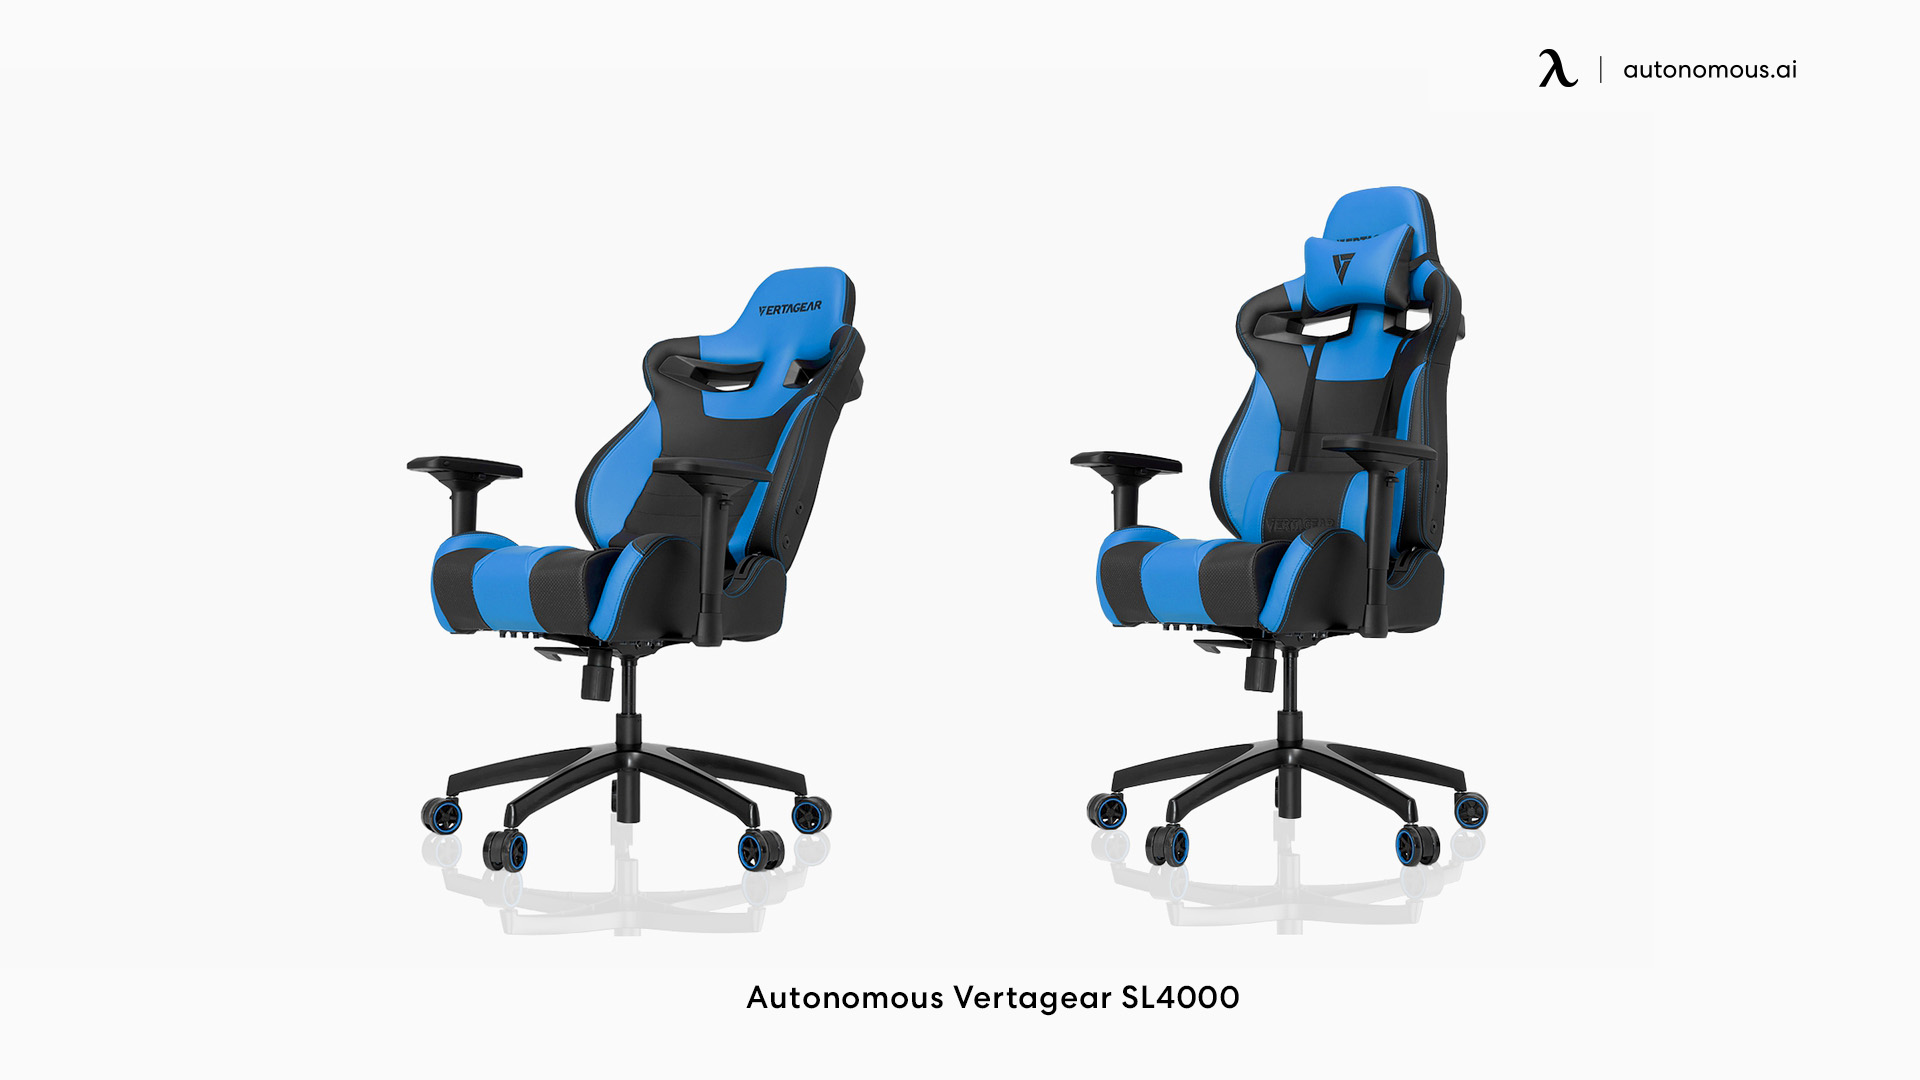 SL4000 comfortable gaming chair by Vertagear